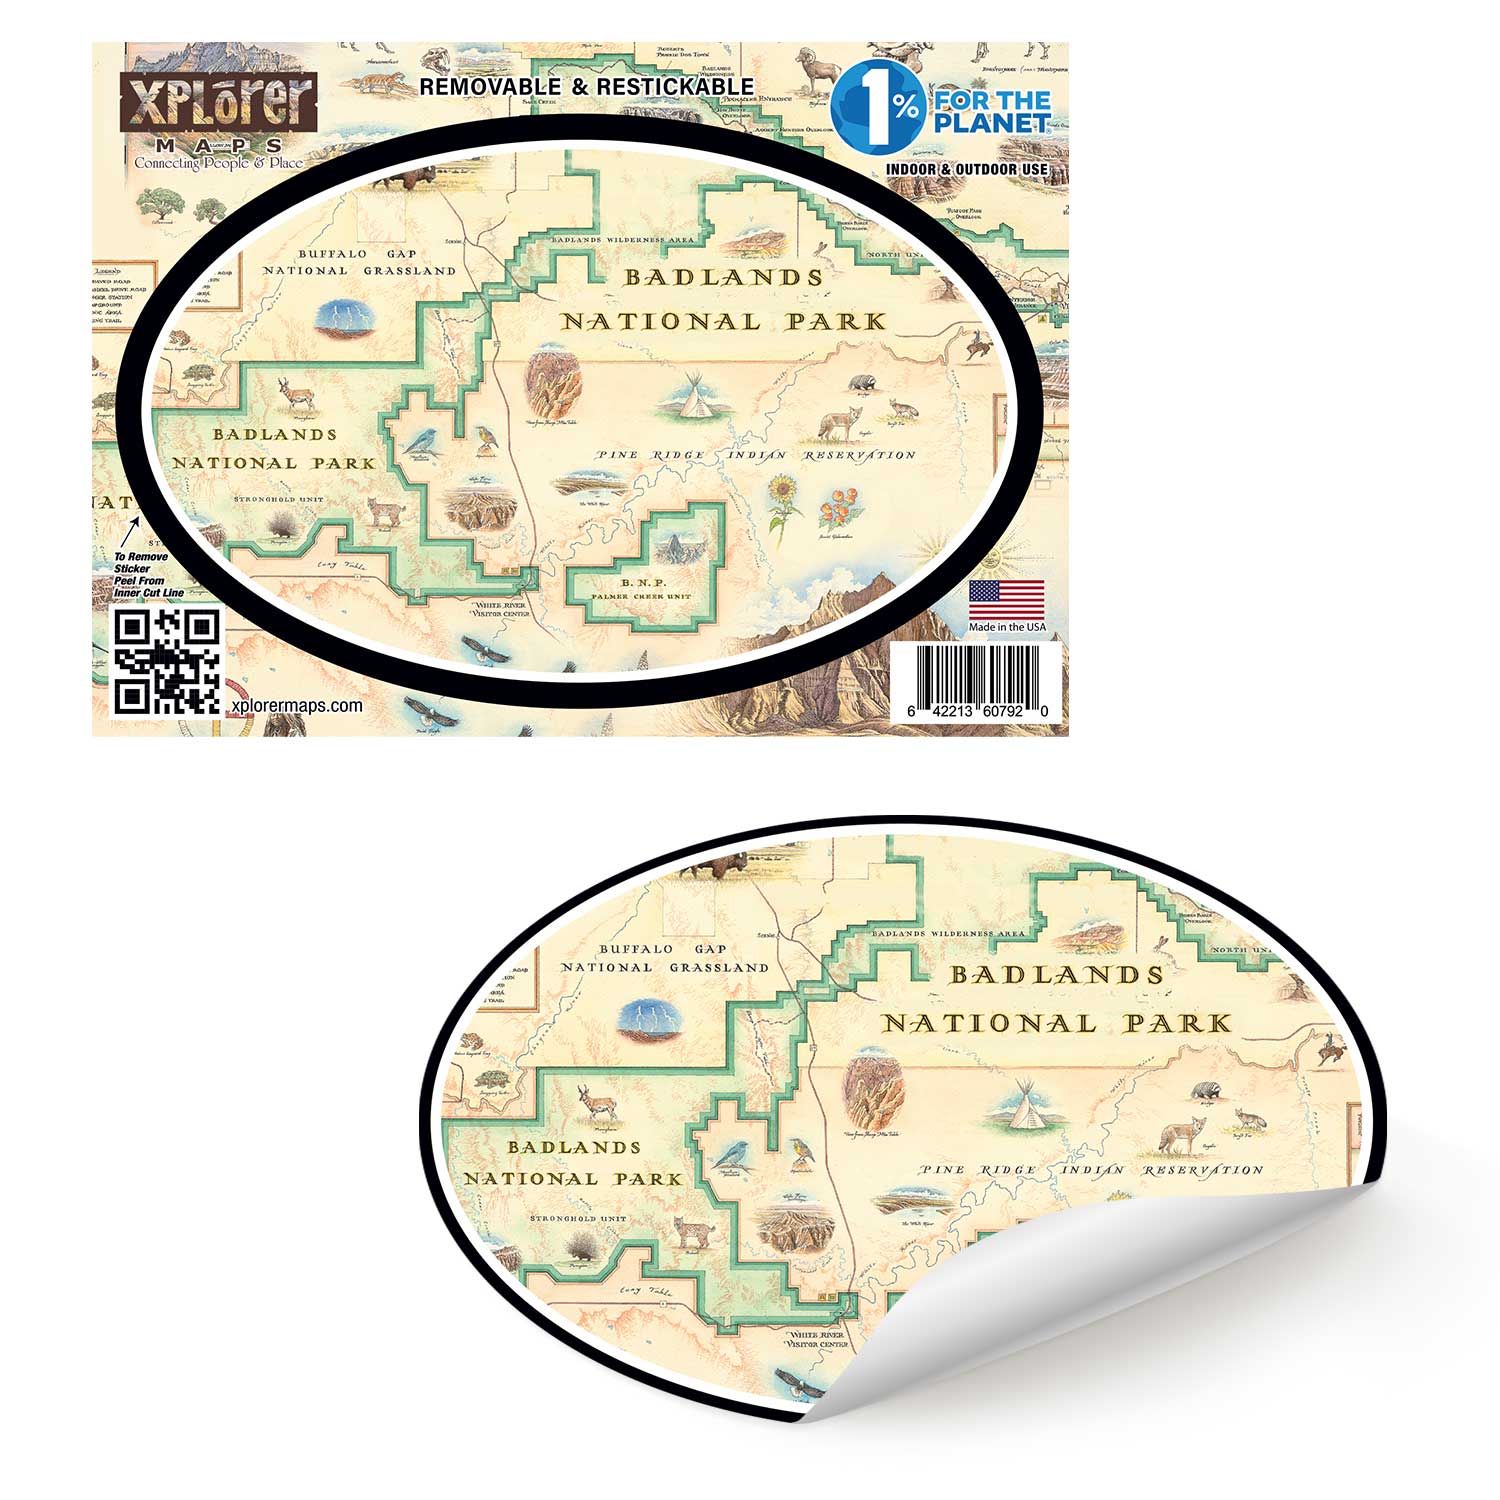 Badlands National Park map sticker in earth tone colors. Featuring buffalo bison, dinosaurs, flower, fox, sheep, eagle.